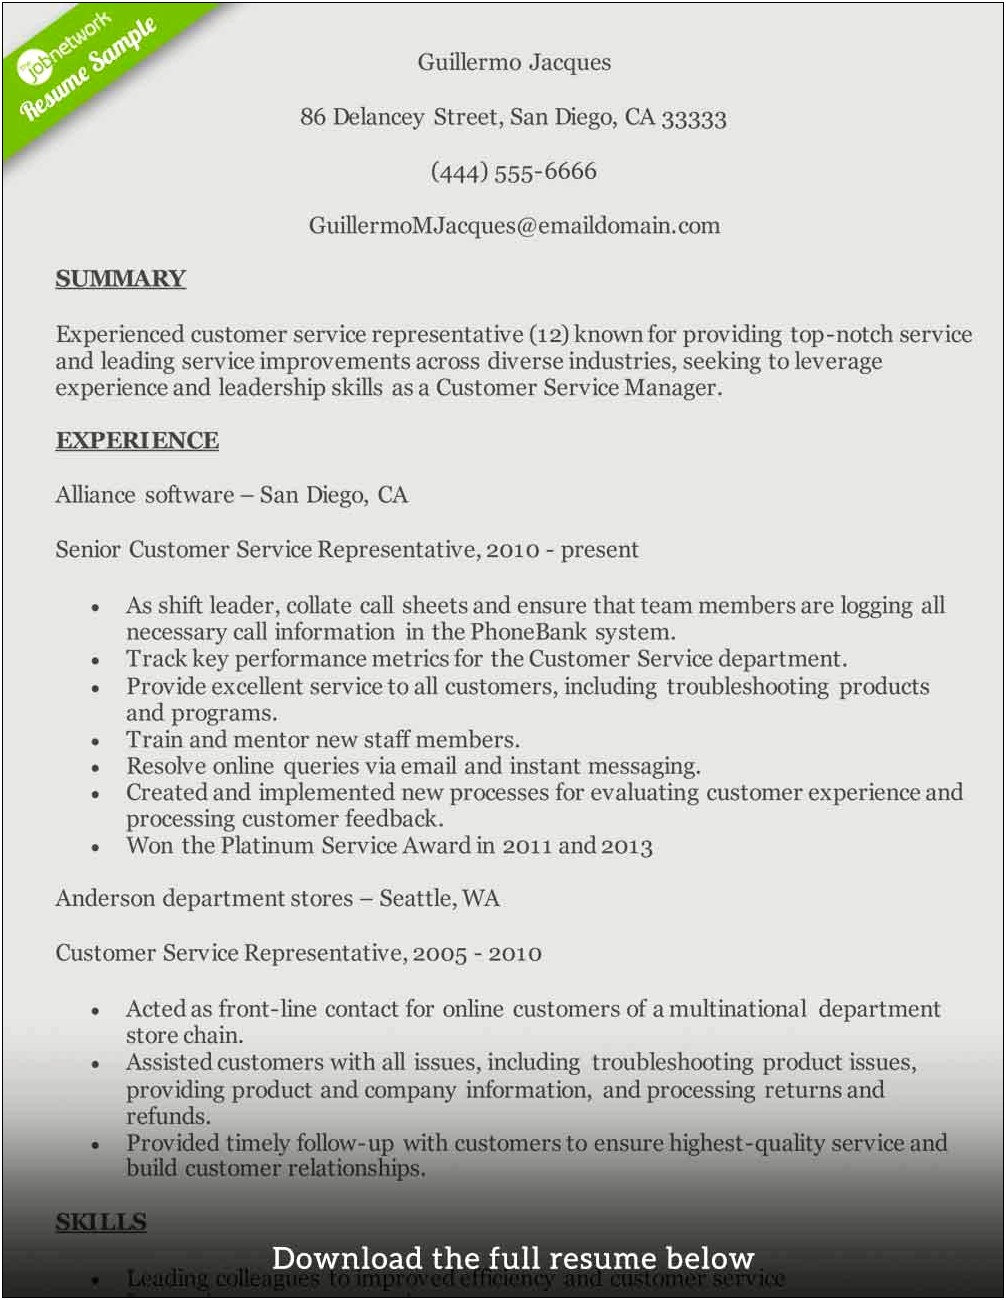 Core Competencies Resume Examples For Customer Service